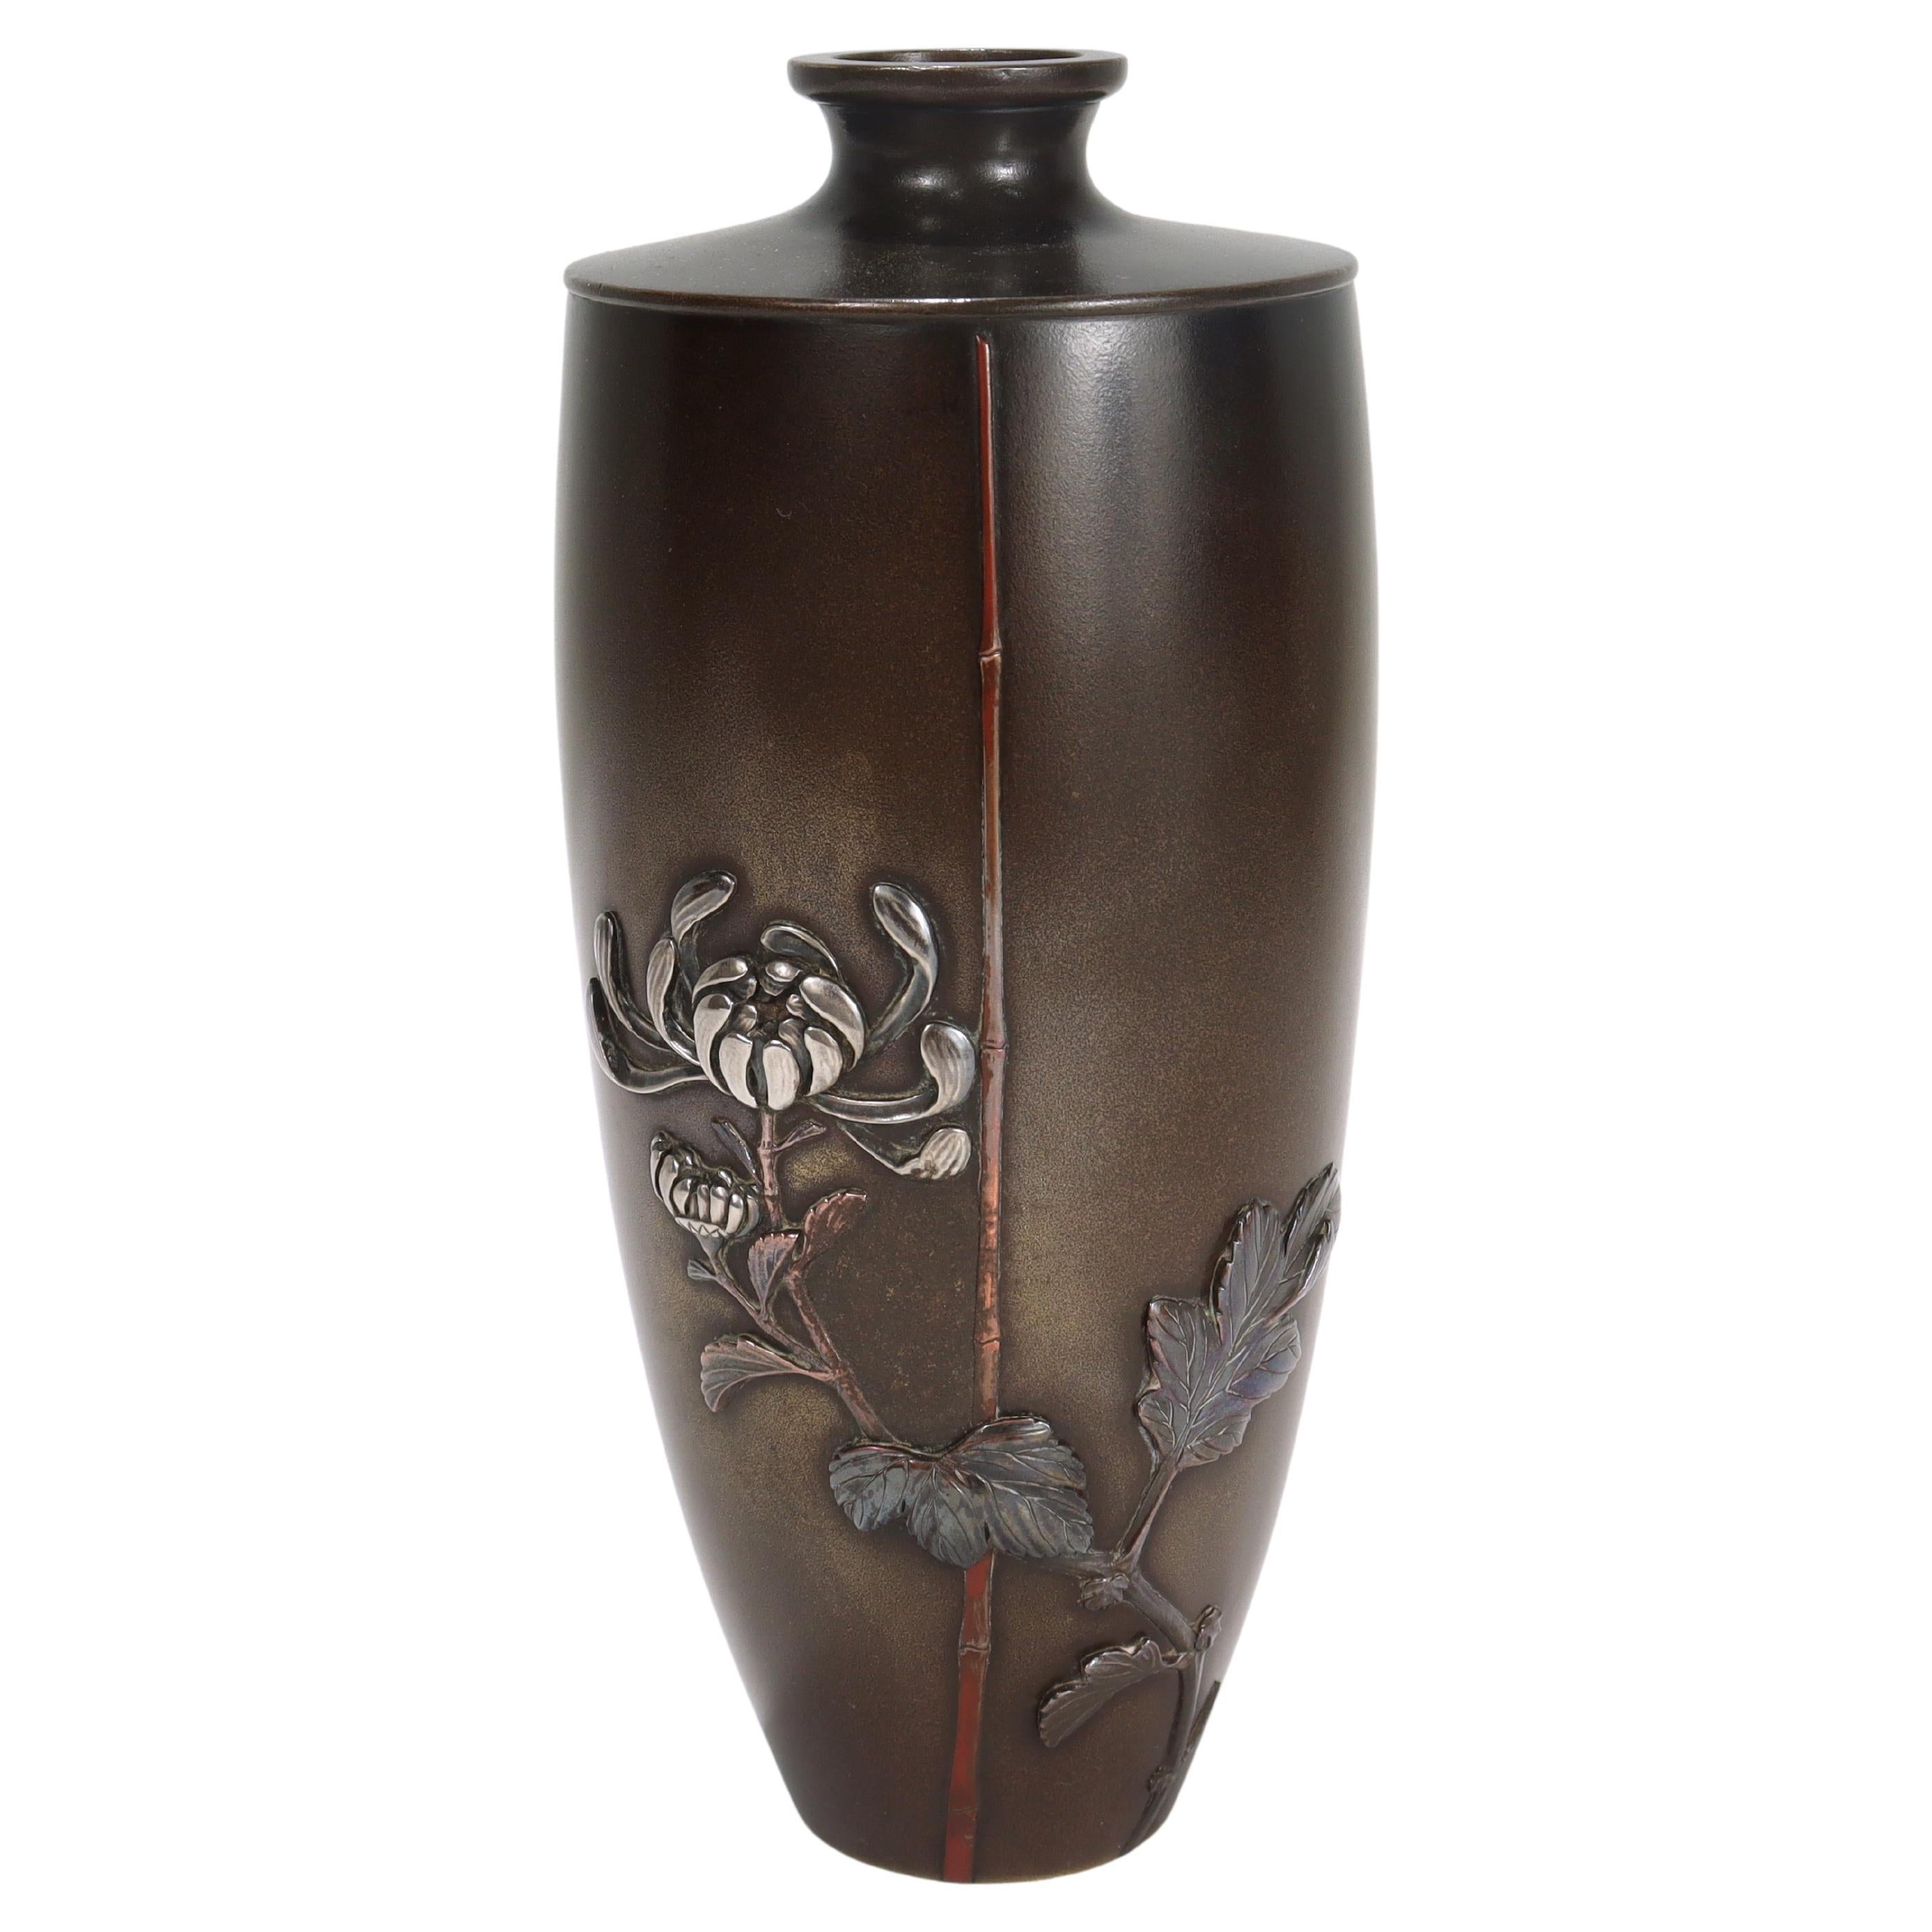 Antique Signed Japanese Bronze Mixed Metals Butterbur Vase by Atsuyoshi / Inoue For Sale